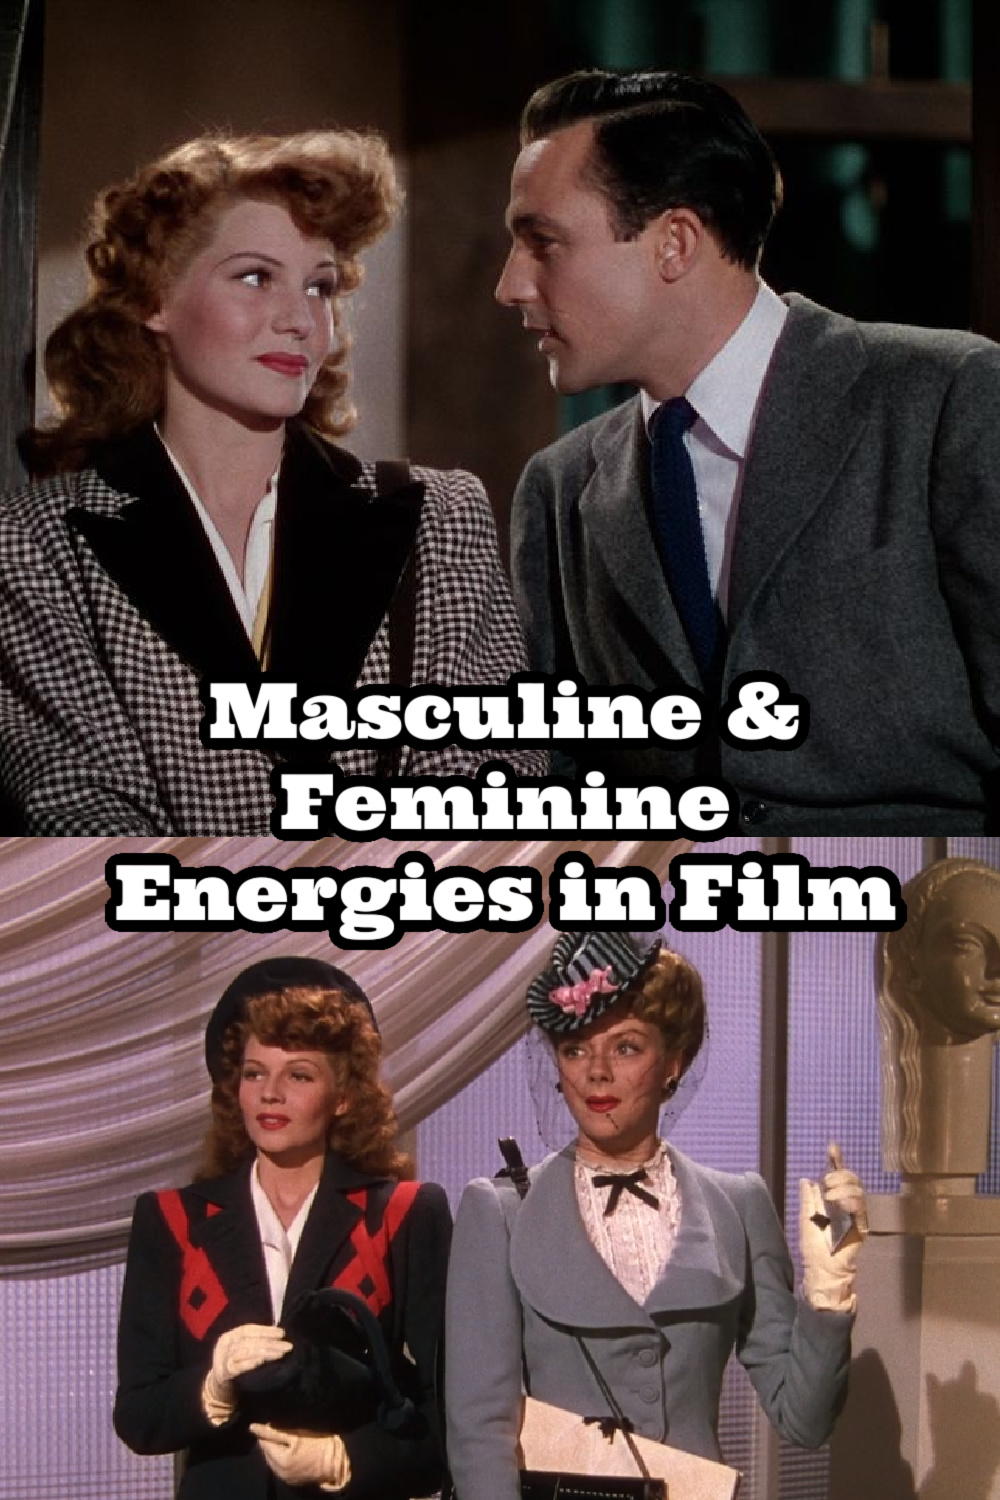 Feminine & Masculine Energy in Relationships | Toxic Masculinity in Women | Cover Girl Film Review